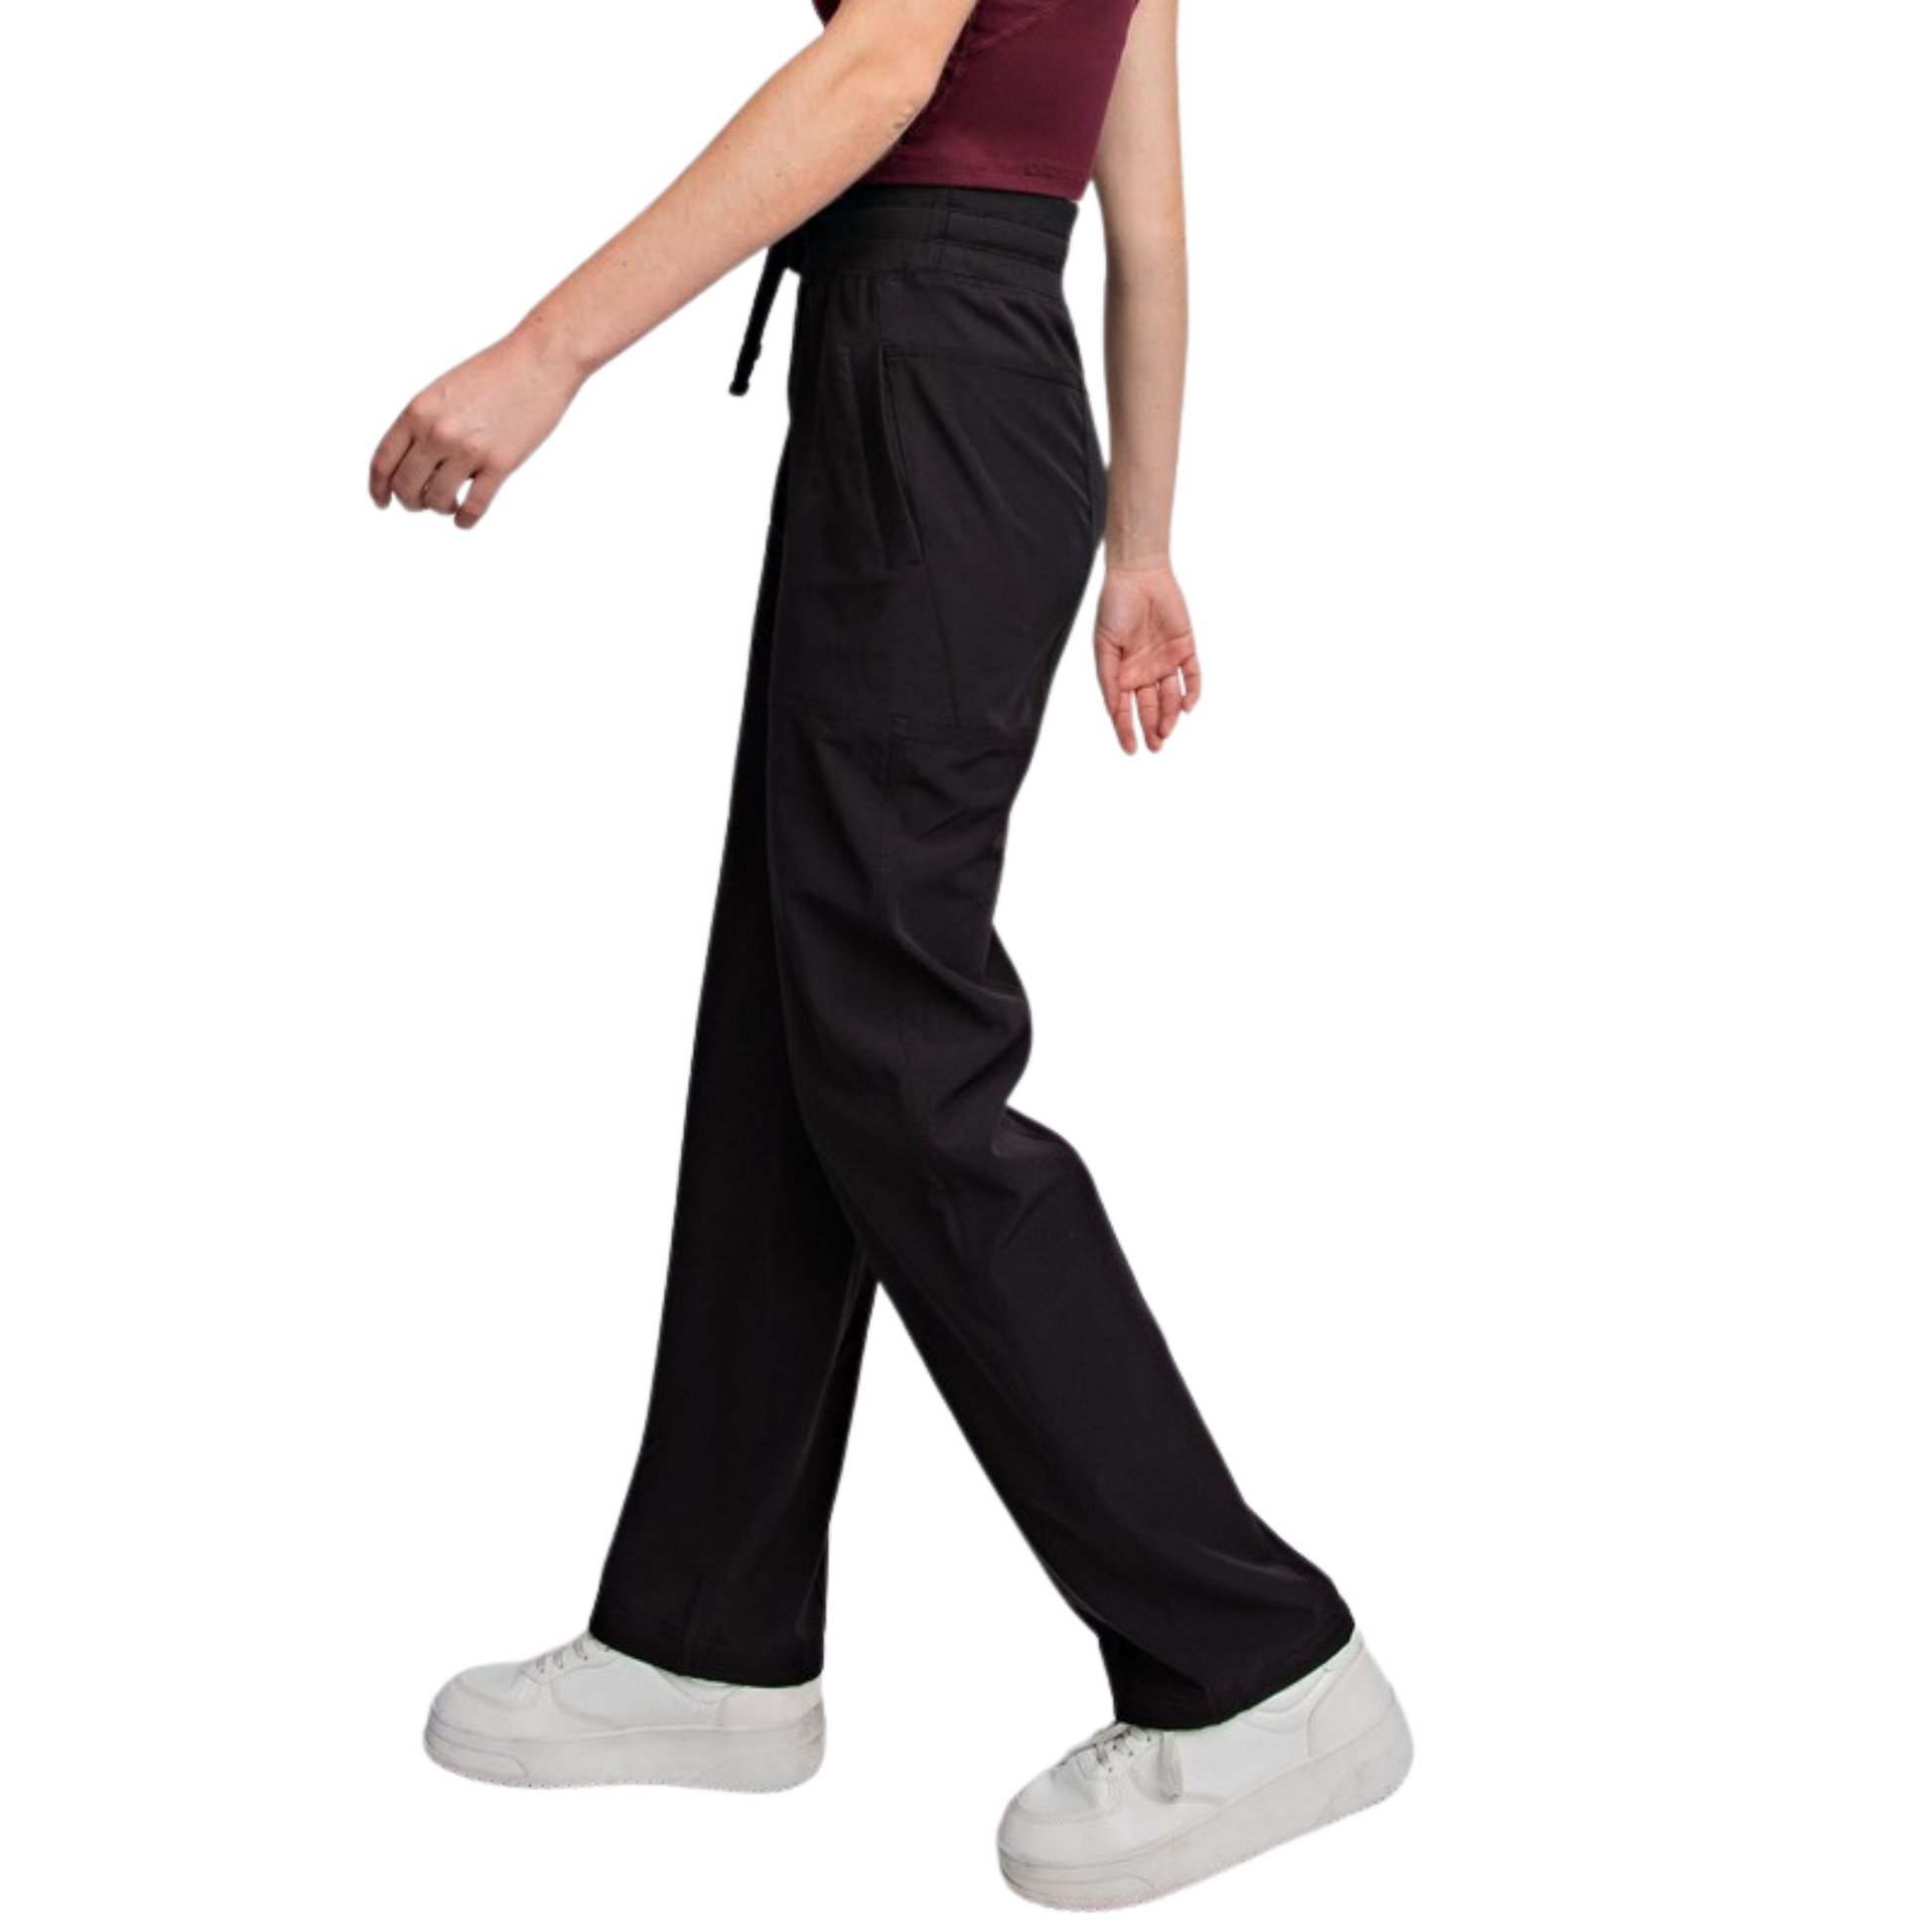 Crafted with oxford St Woven fabric, these plus size Mid Rise Pants are perfect for any dance studio session. Designed for full length coverage, these black pants are both comfortable and stylish. Experience the durability and flexibility of the Oxford Mid Rise Pants.